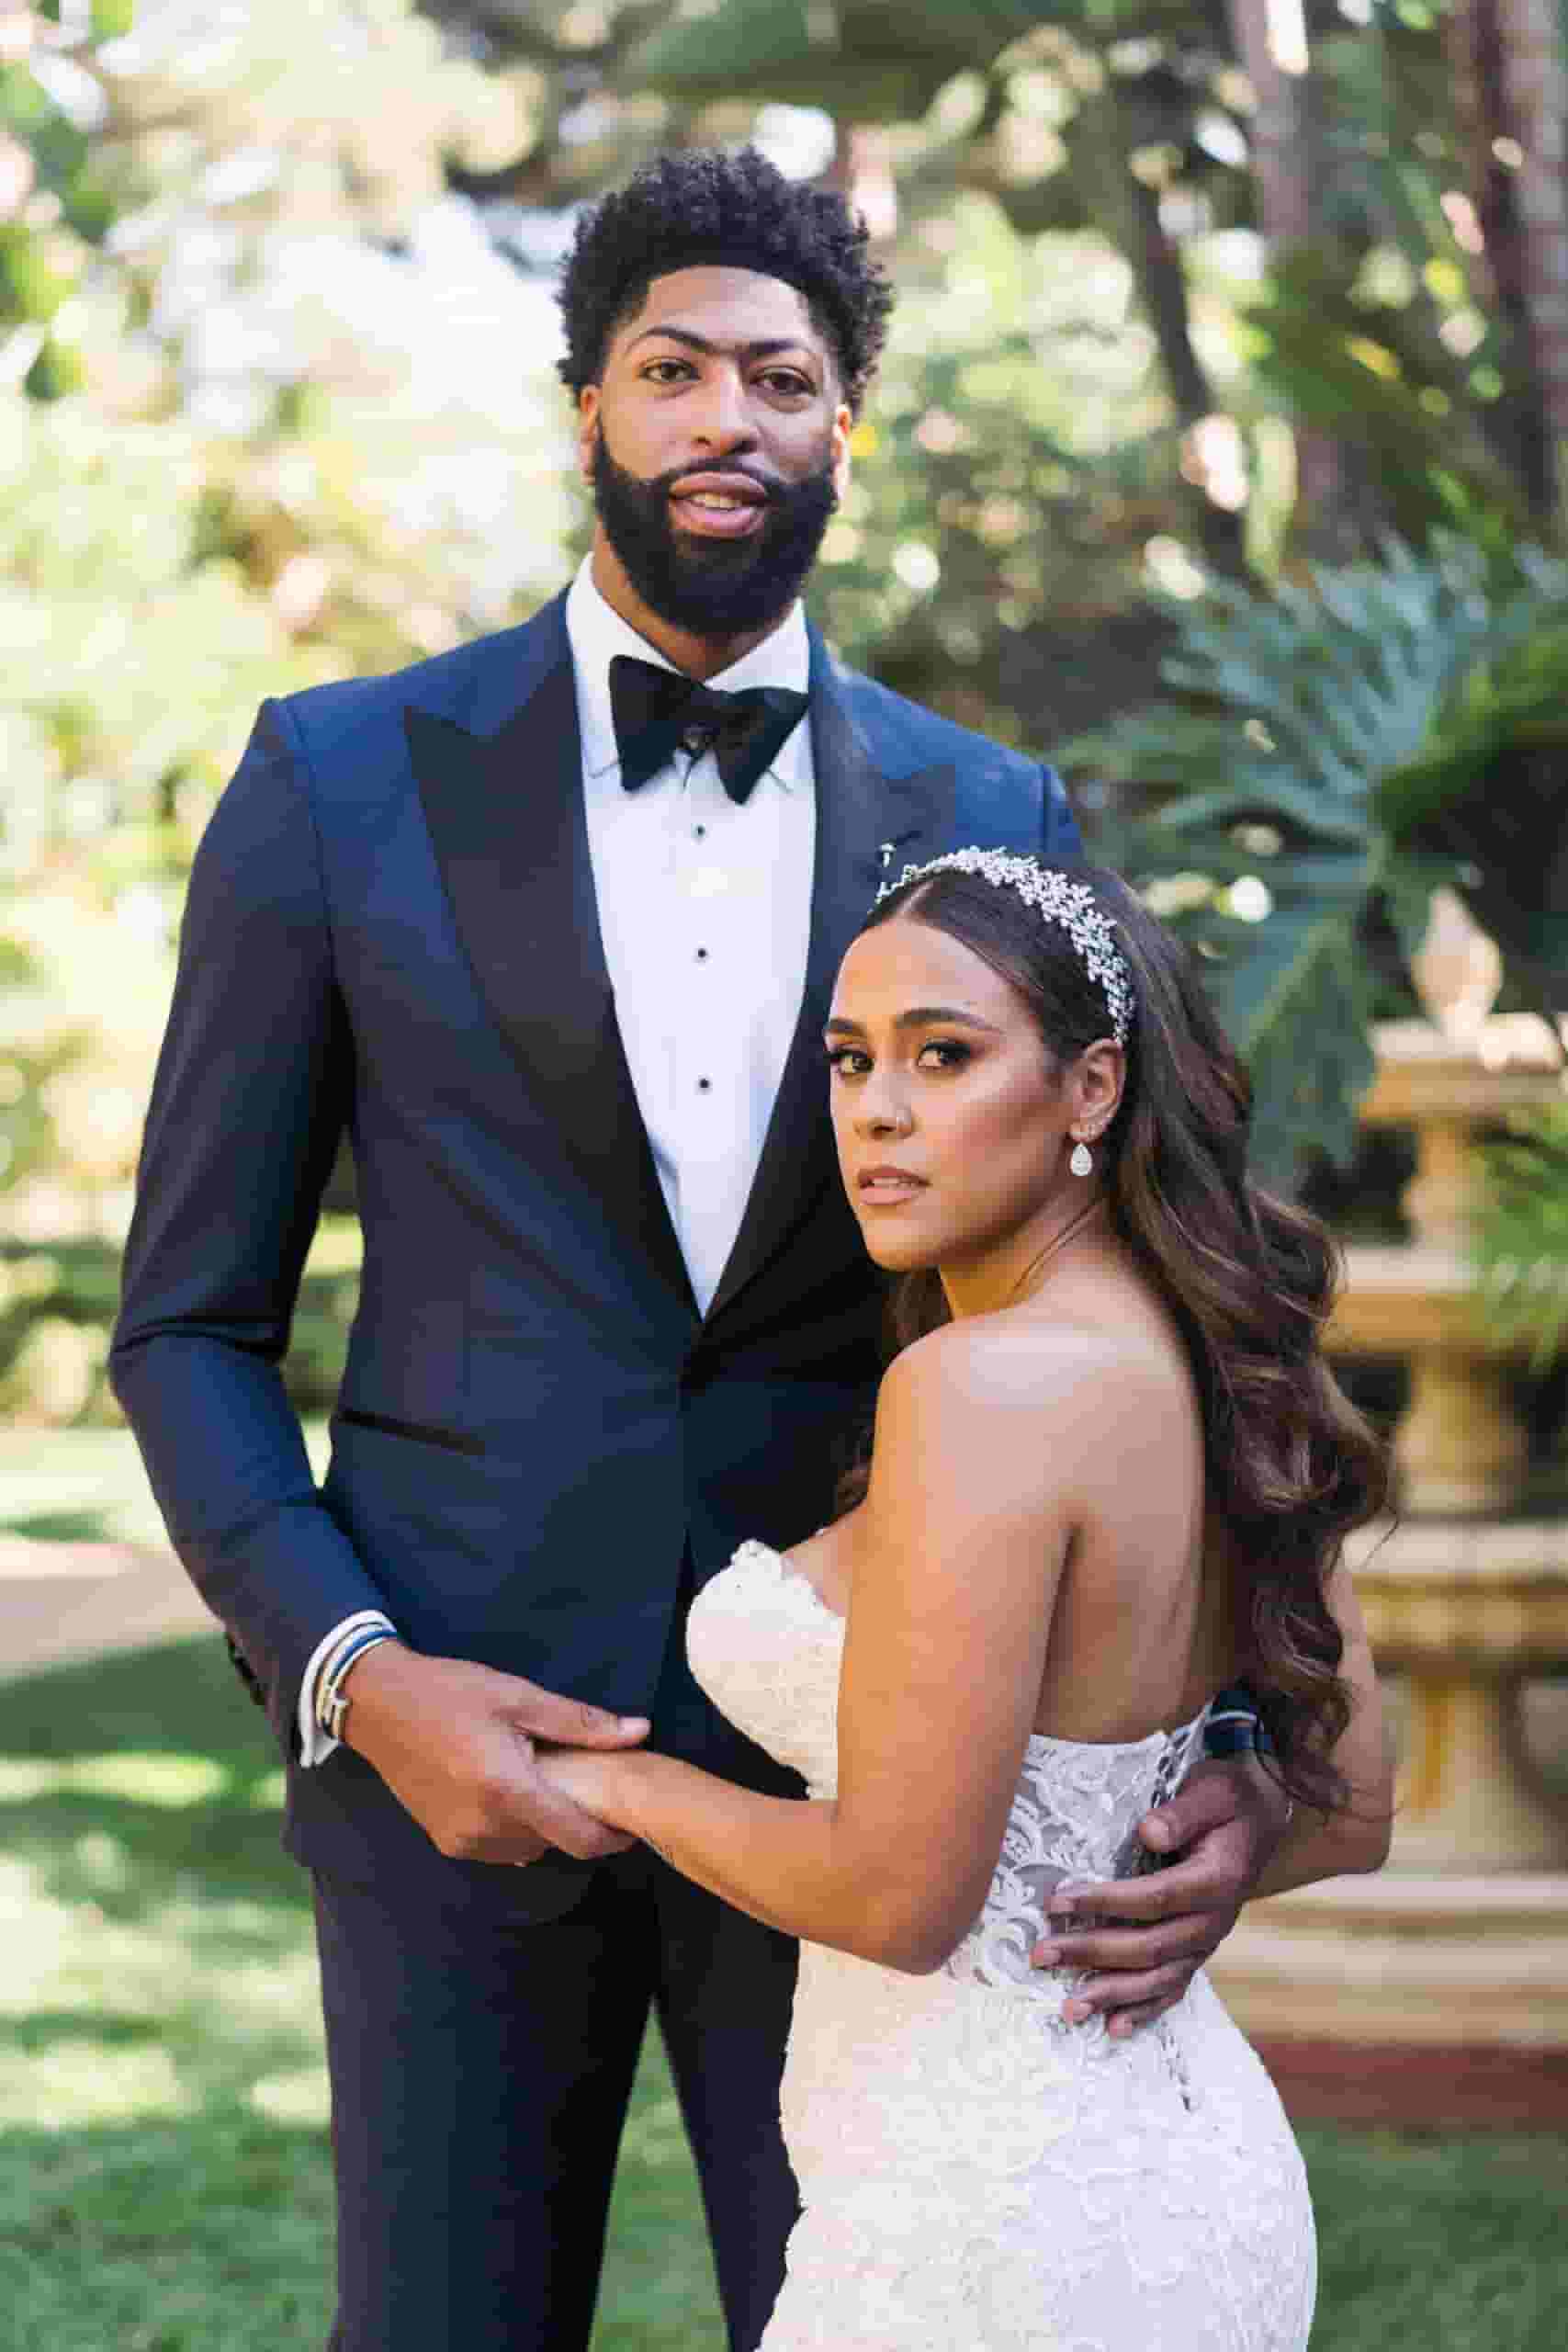 Image of Anthony Davis with his wife Marlen Davis 